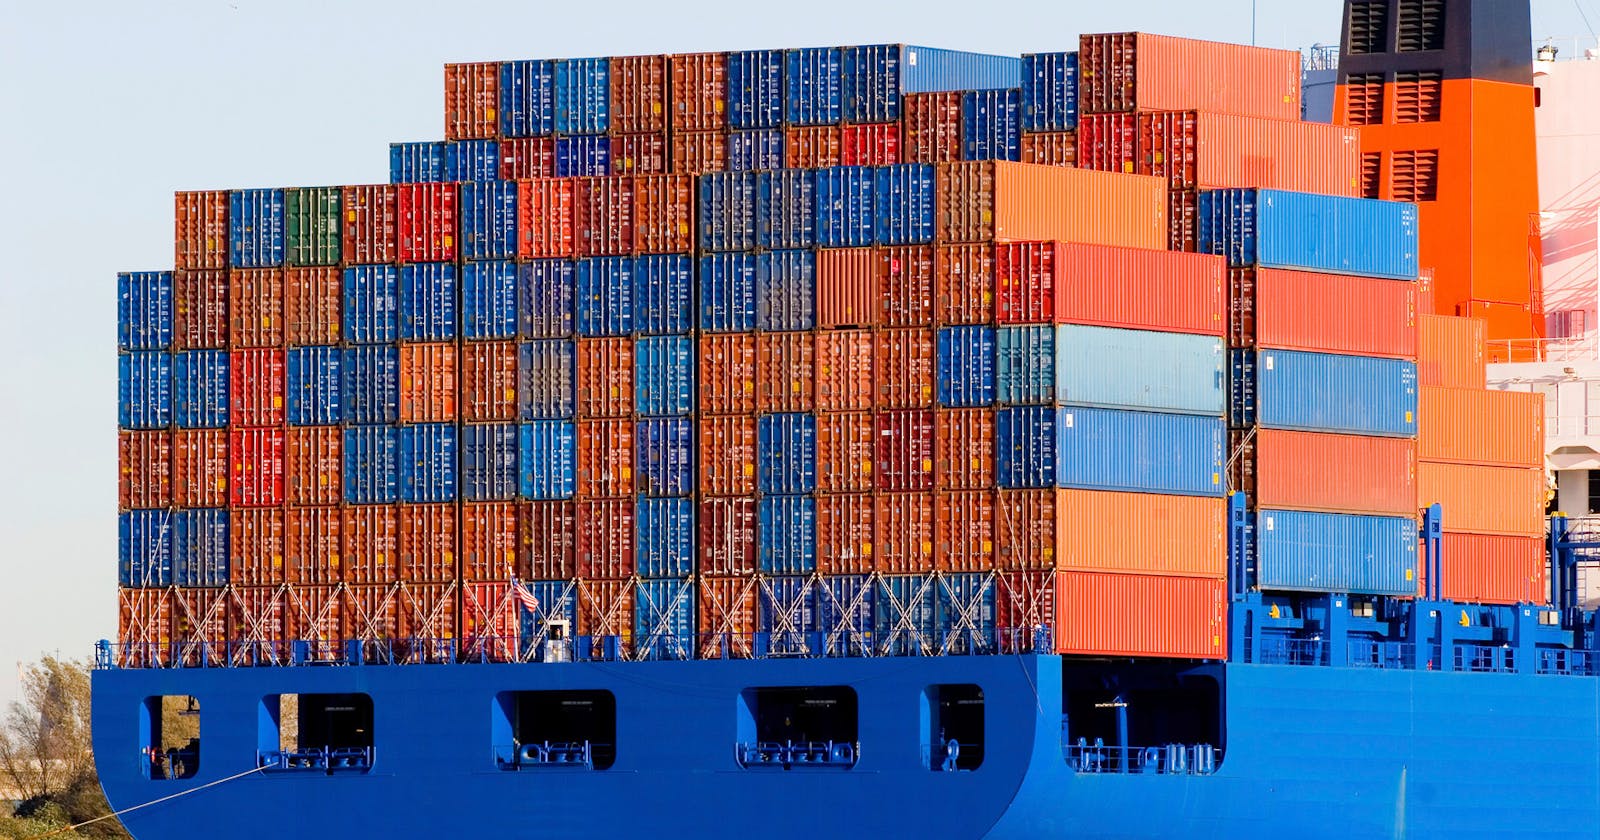 Introduction to Docker and containerization